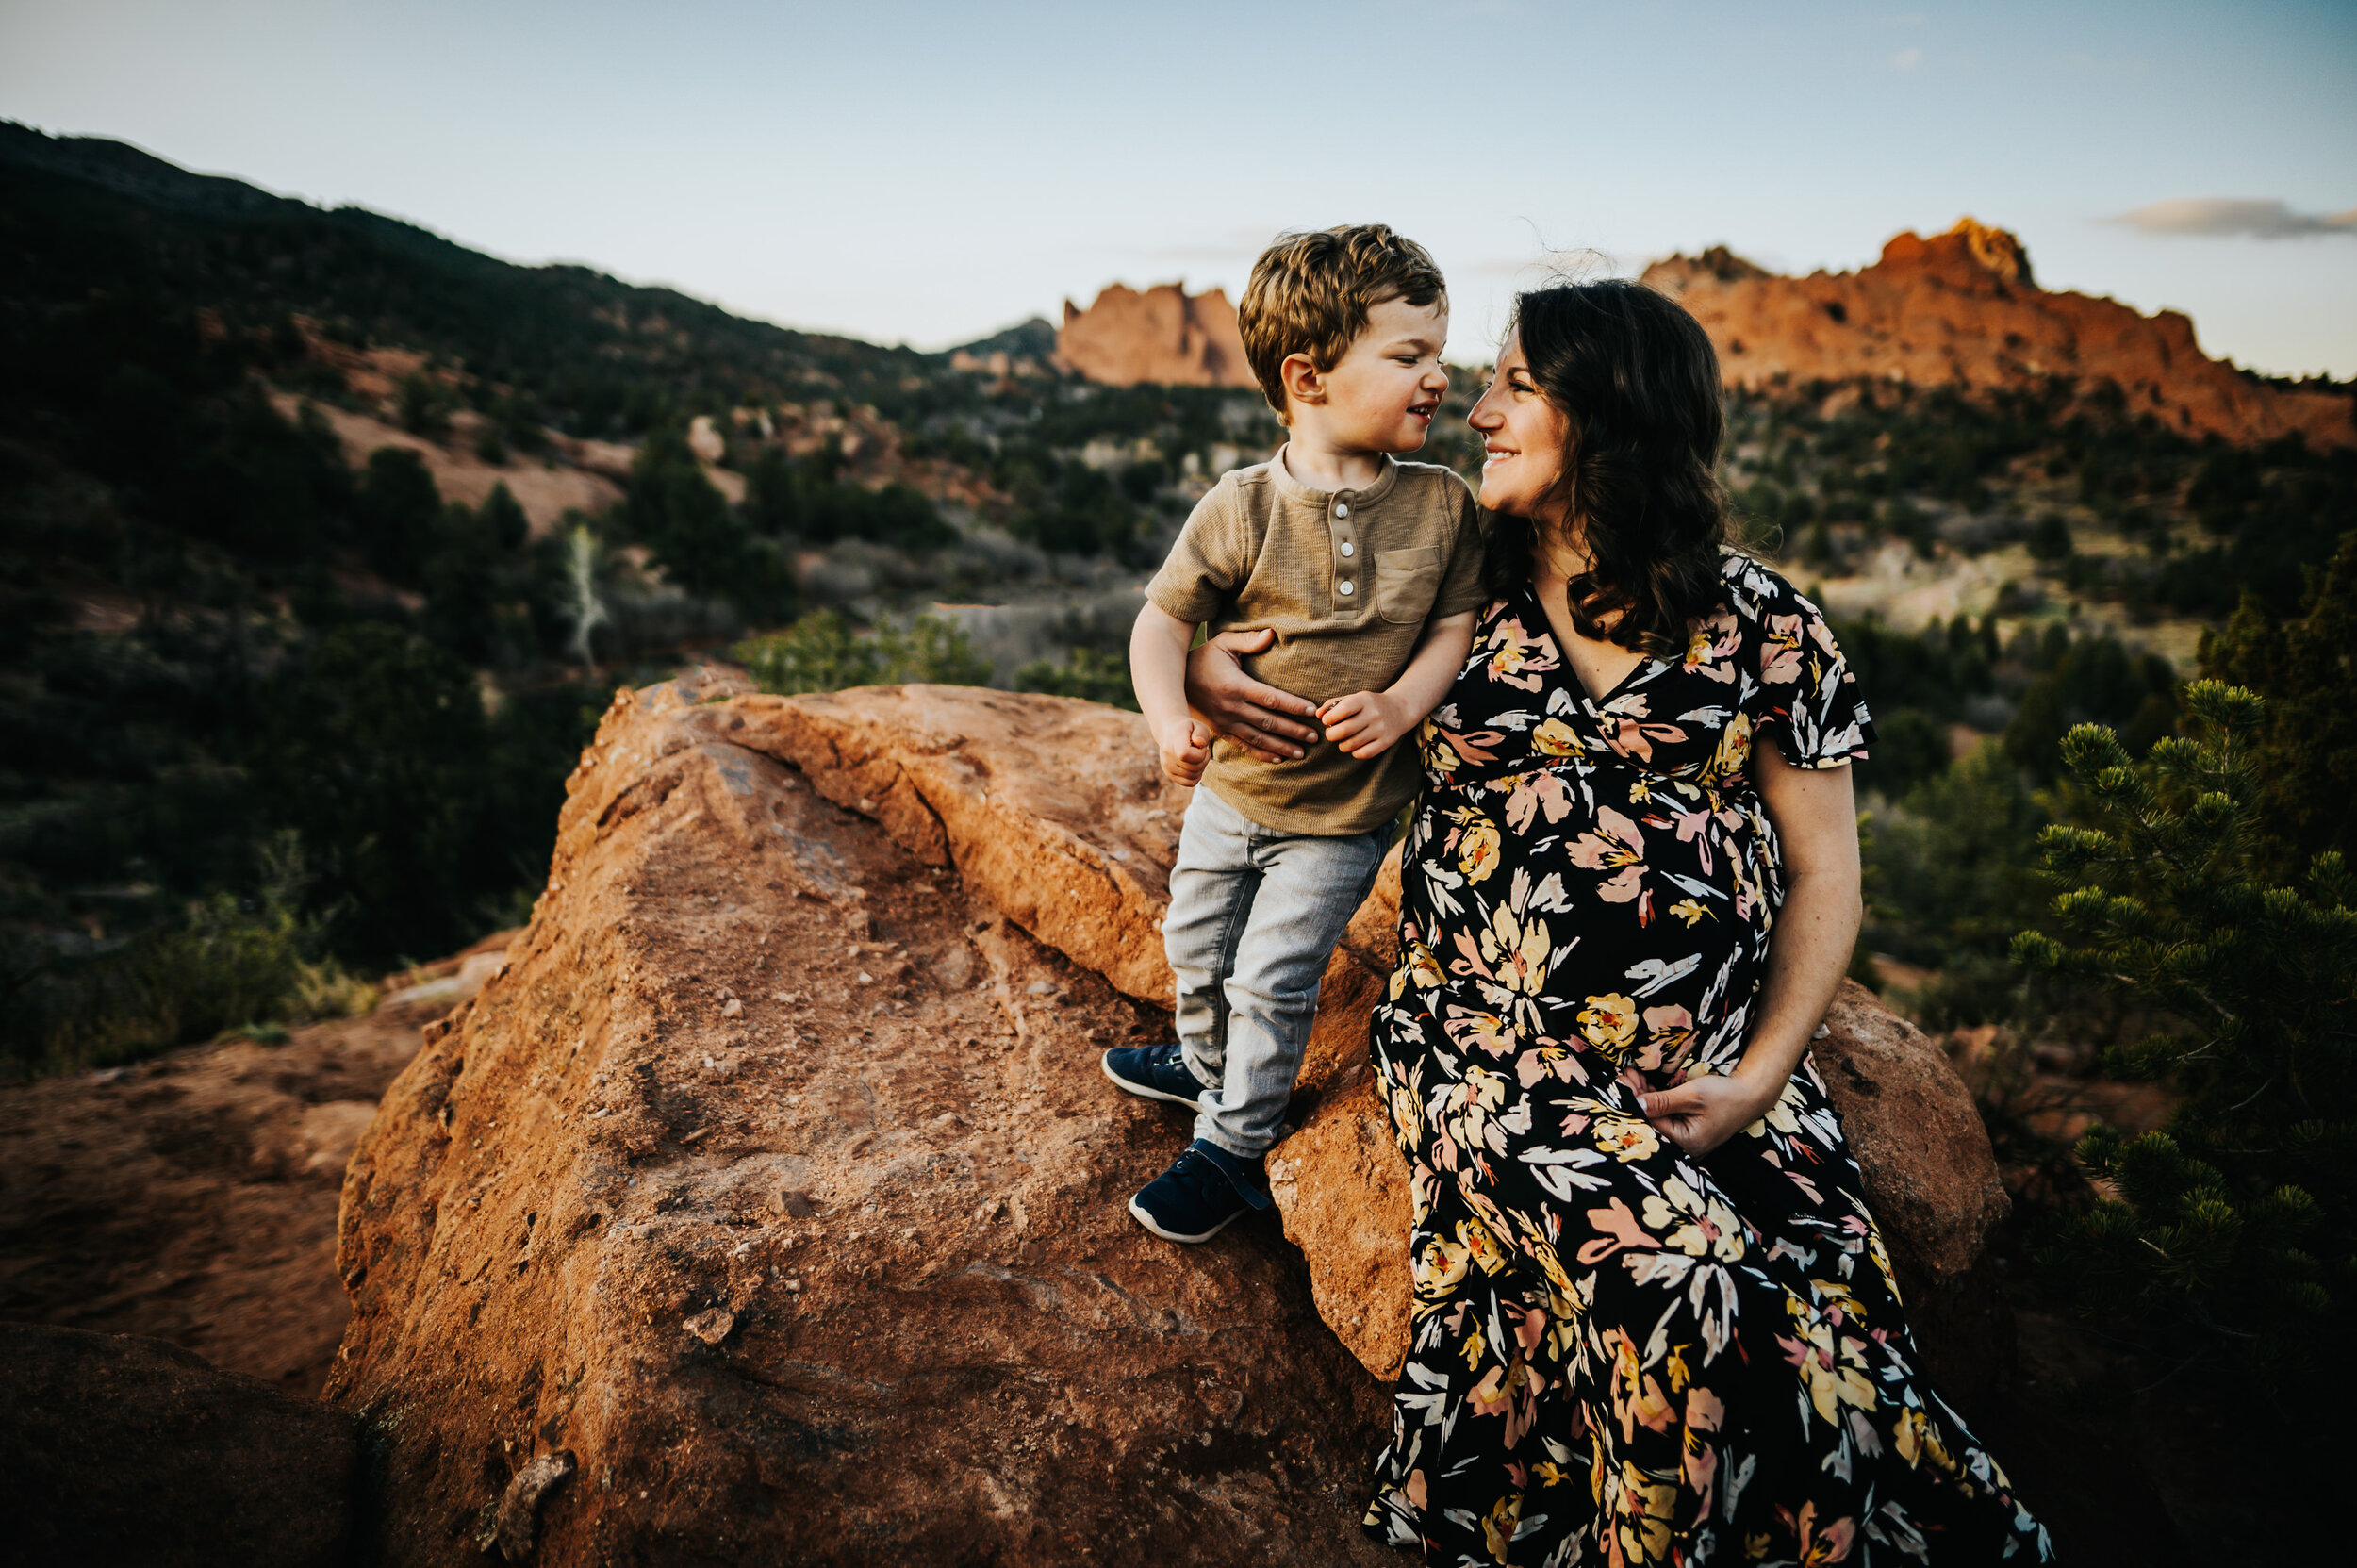 Andrea Grimm Maternity Family Session Colorado Springs Sunset Garden of the Gods Wild Prairie Photography-13-2020.jpg